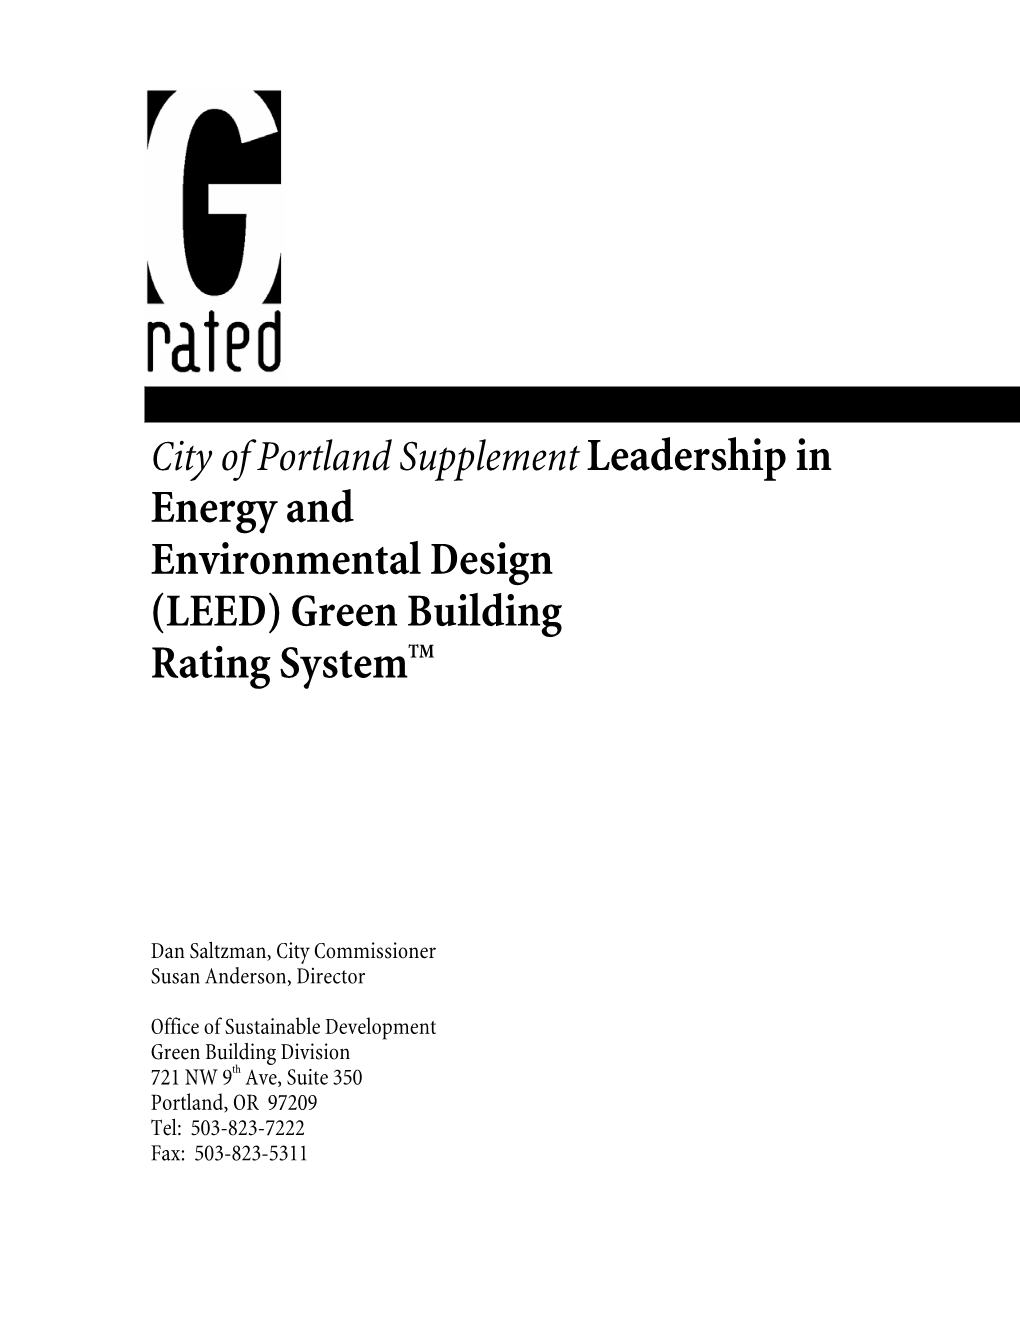 Energy and Environmental Design (LEED) Green Building Rating Systemtm